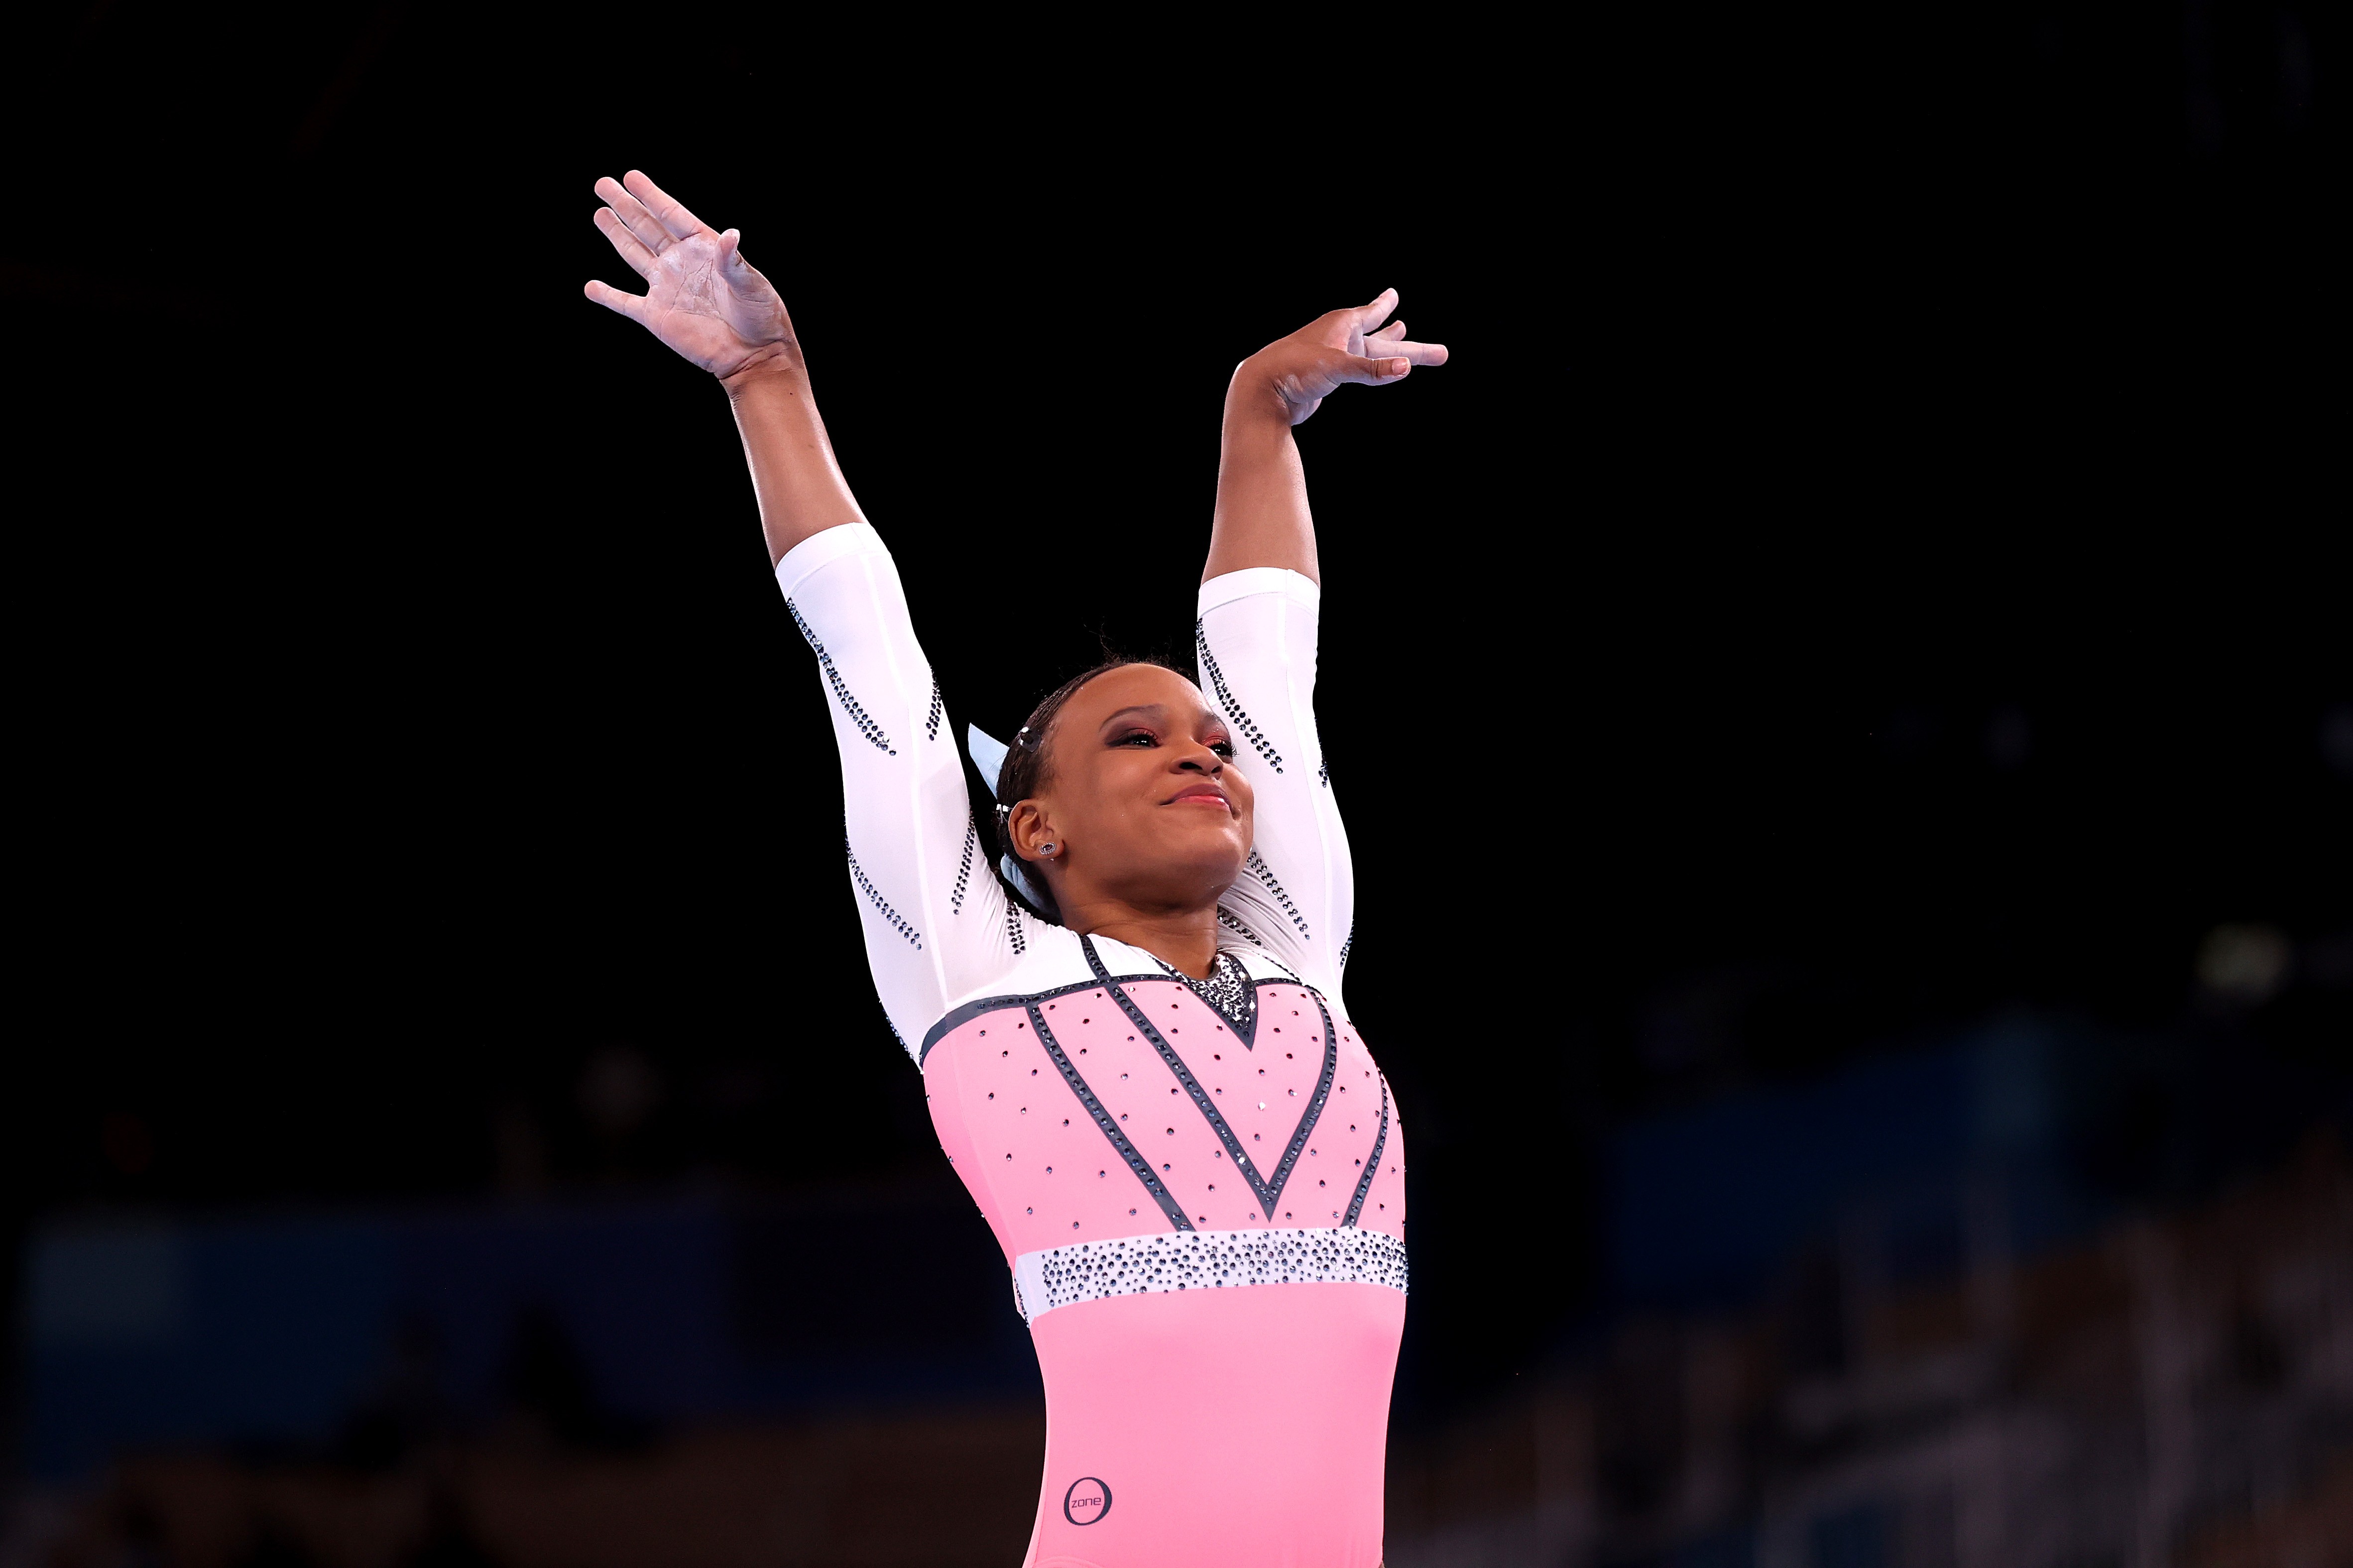 TOKYO, JAPAN - AUGUST 01: Rebeca Andrade of Team Brazil competes in the Women's Vault Final on day nine of the Tokyo 2020 Olympic Games at Ariake Gymnastics Centre on August 01, 2021 in Tokyo, Japan. (Photo by Laurence Griffiths/Getty Images) (Foto: Getty Images)